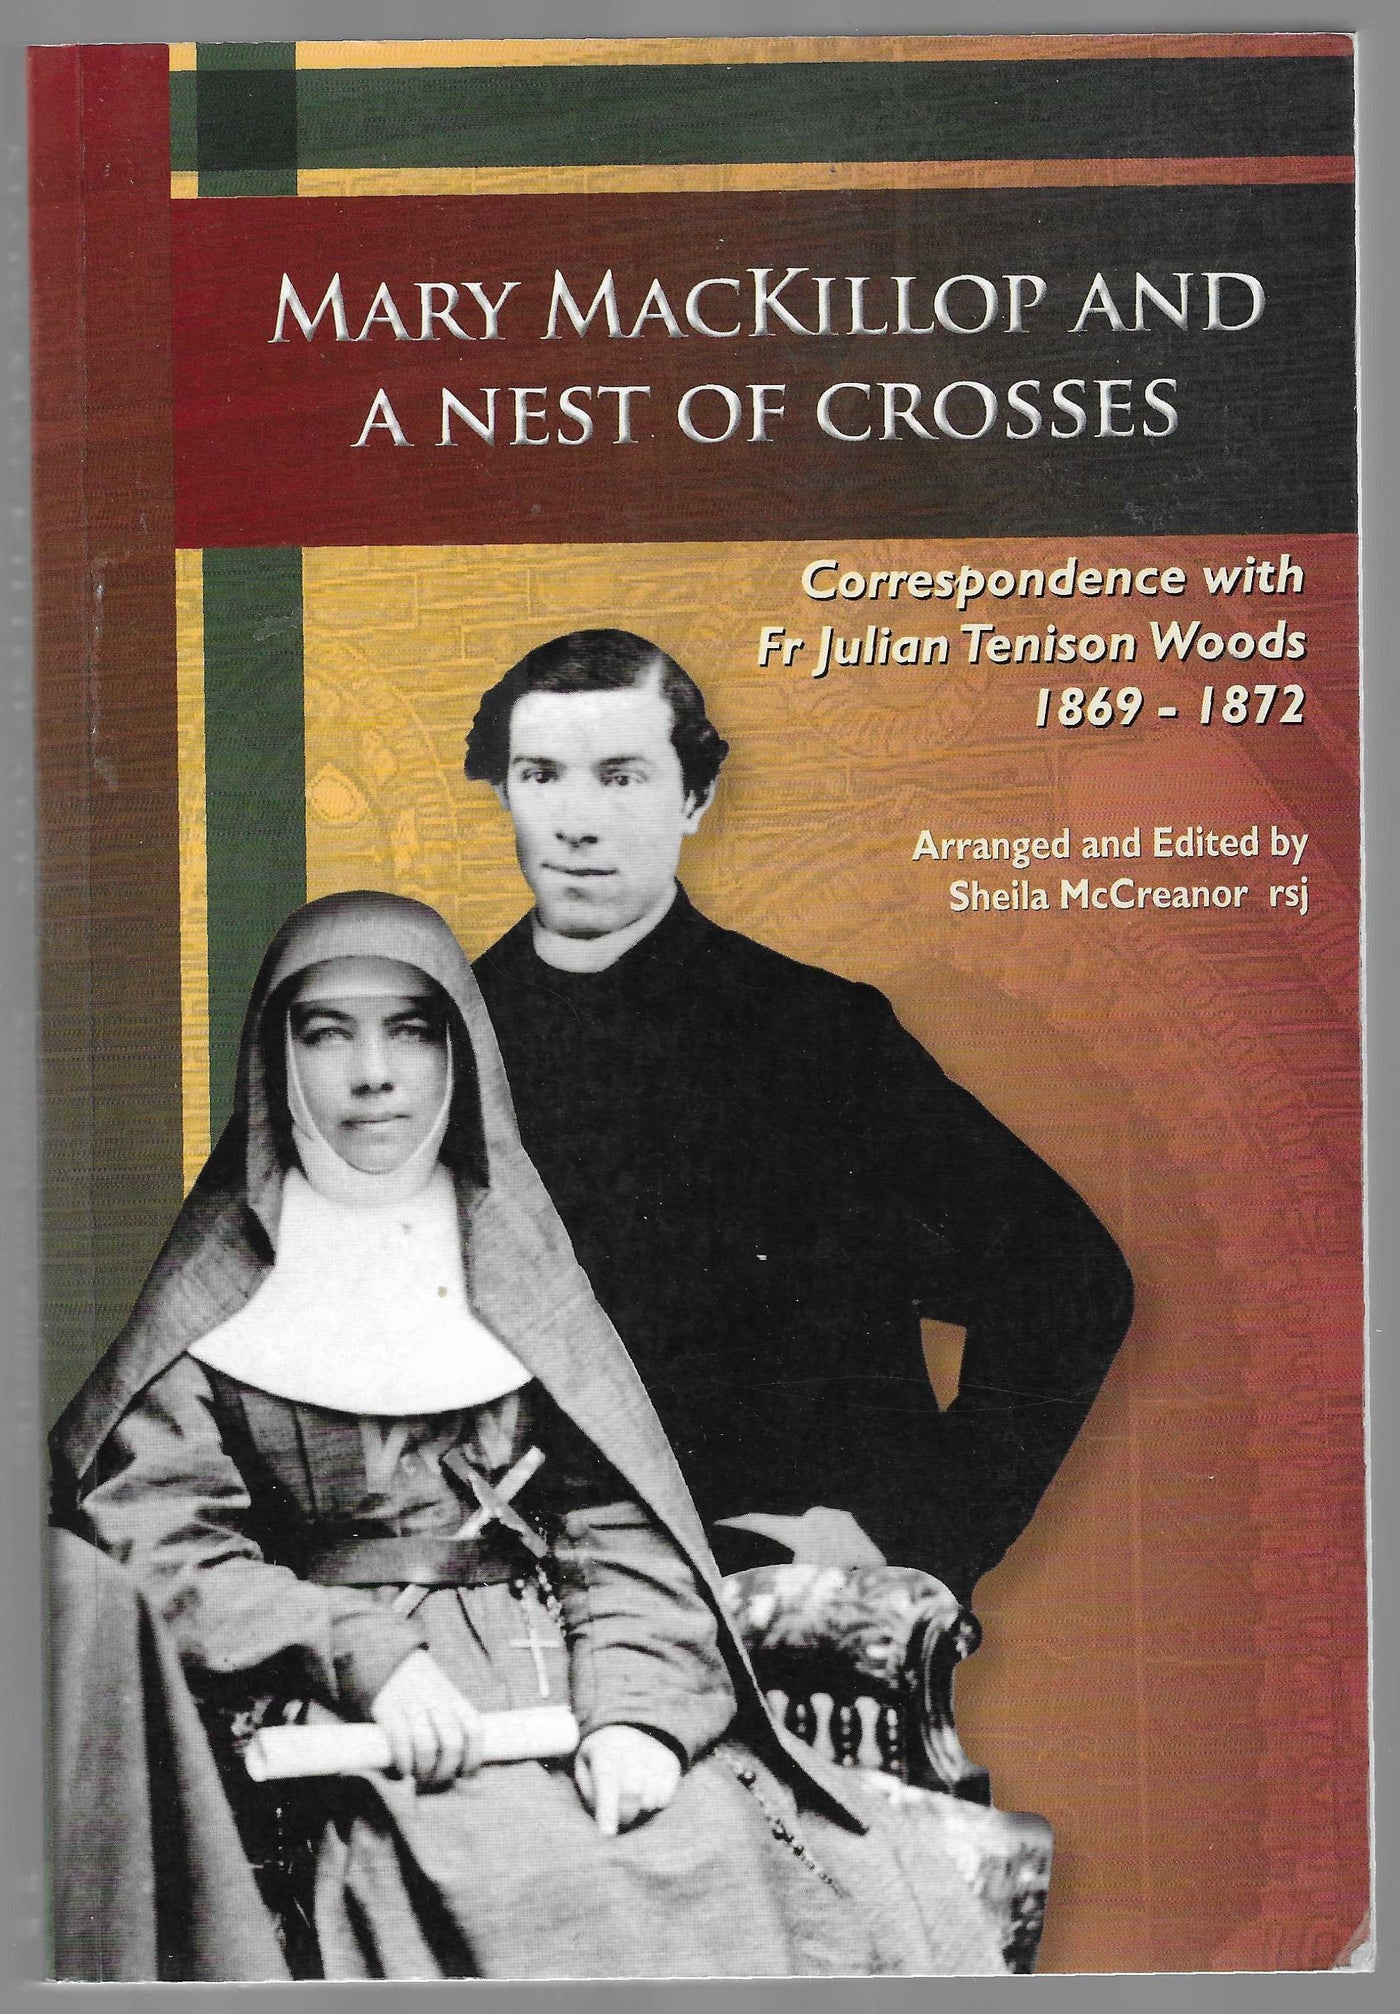 Mary MacKillop and a Nest of Crosses: Correspondence with Fr Julian Tenison Woods 1869-1872